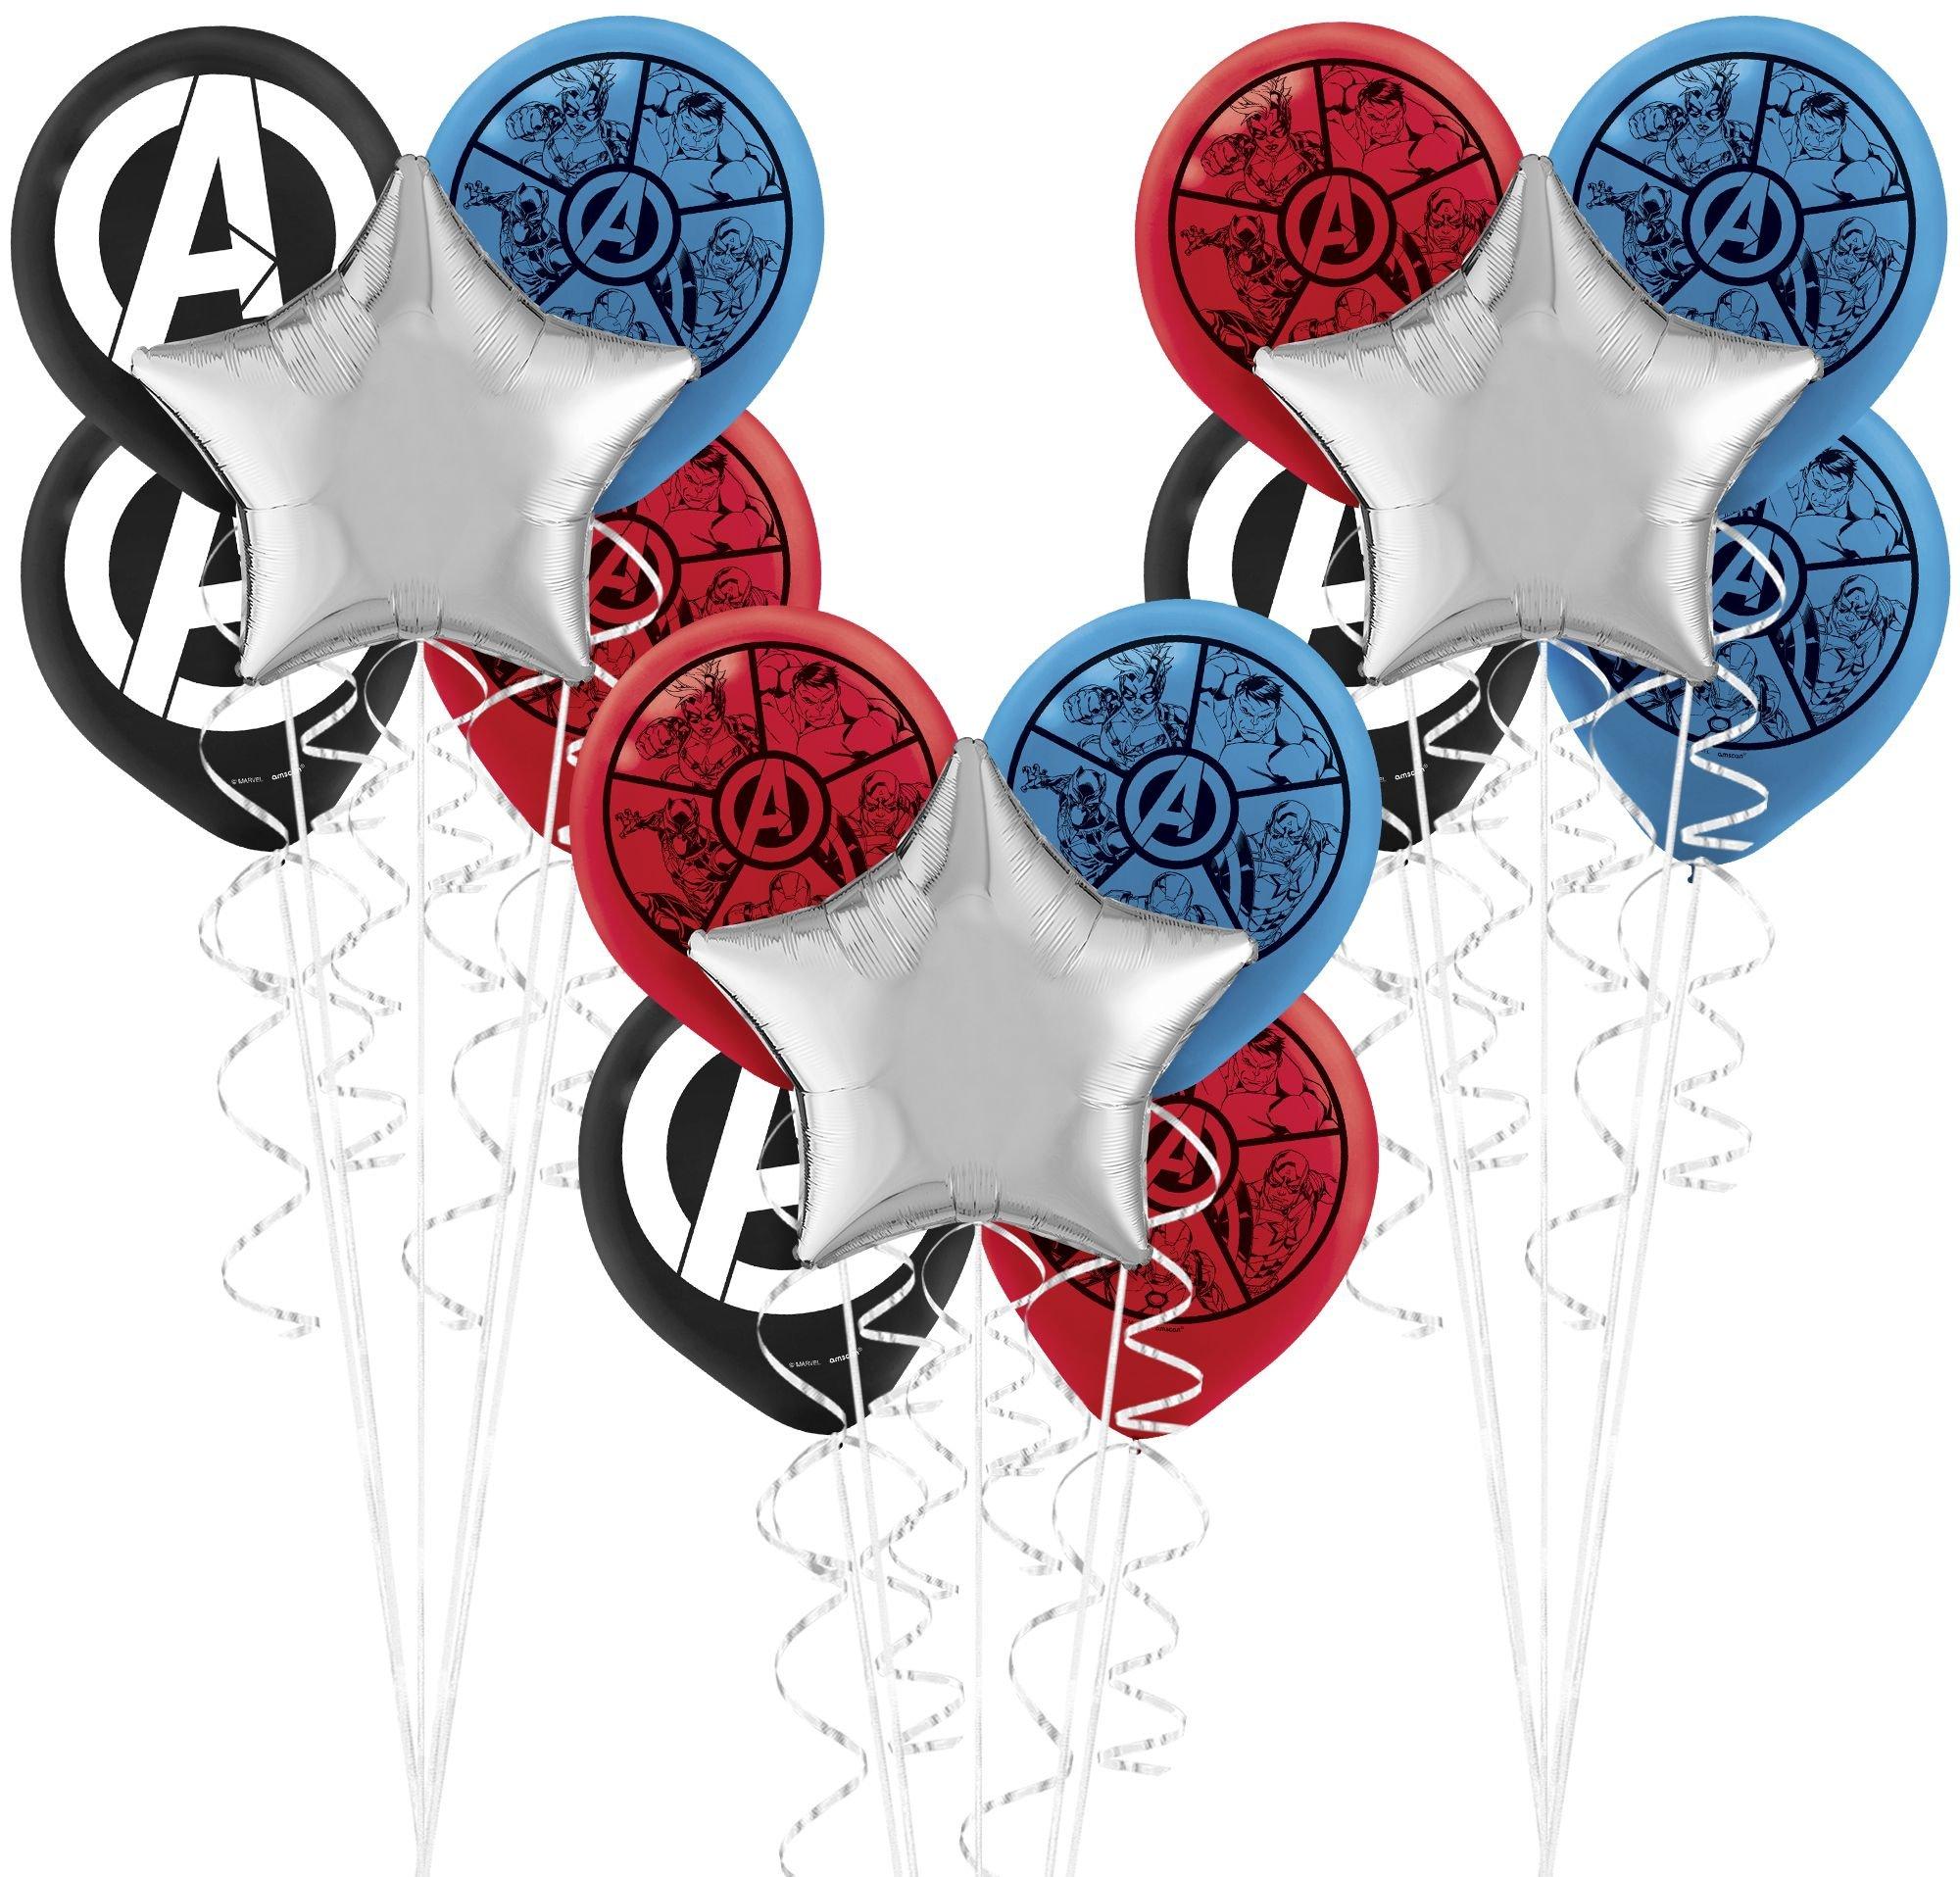 Marvel Powers Unite Balloon Bouquet Supplies Pack - Kit Includes Themed Latex Balloons & Star Foil Balloons